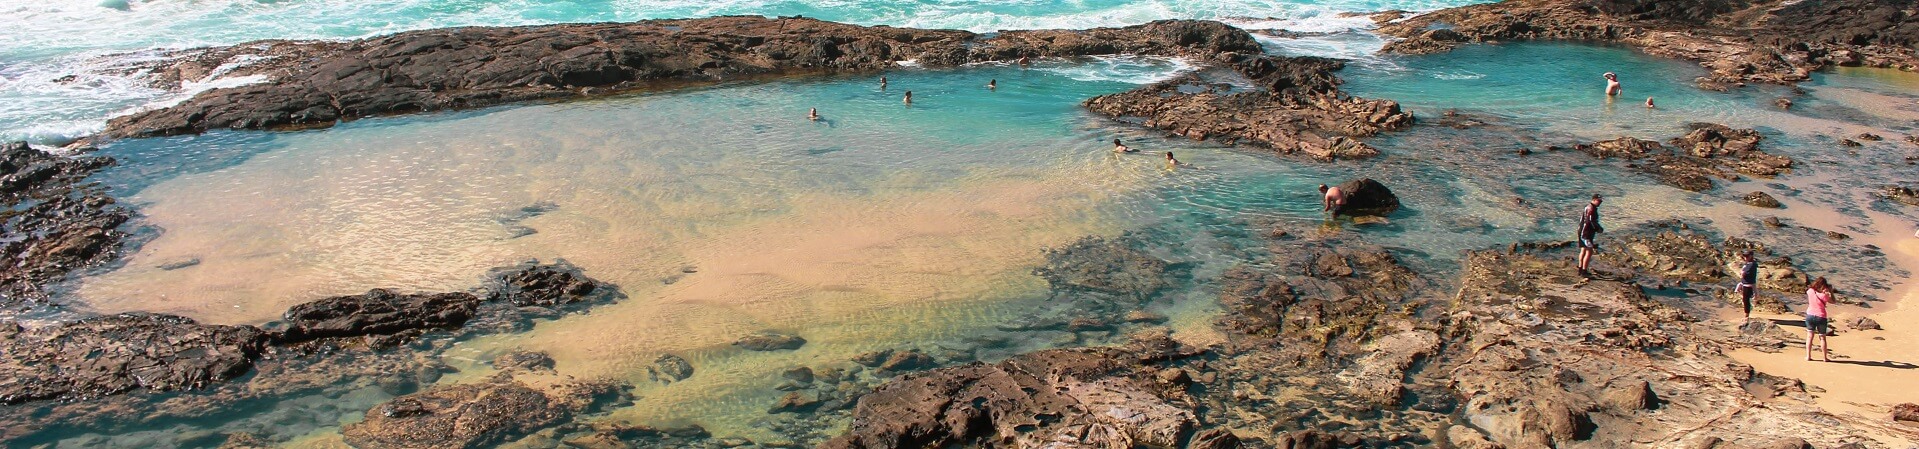 When should I go to the Champagne Pools?